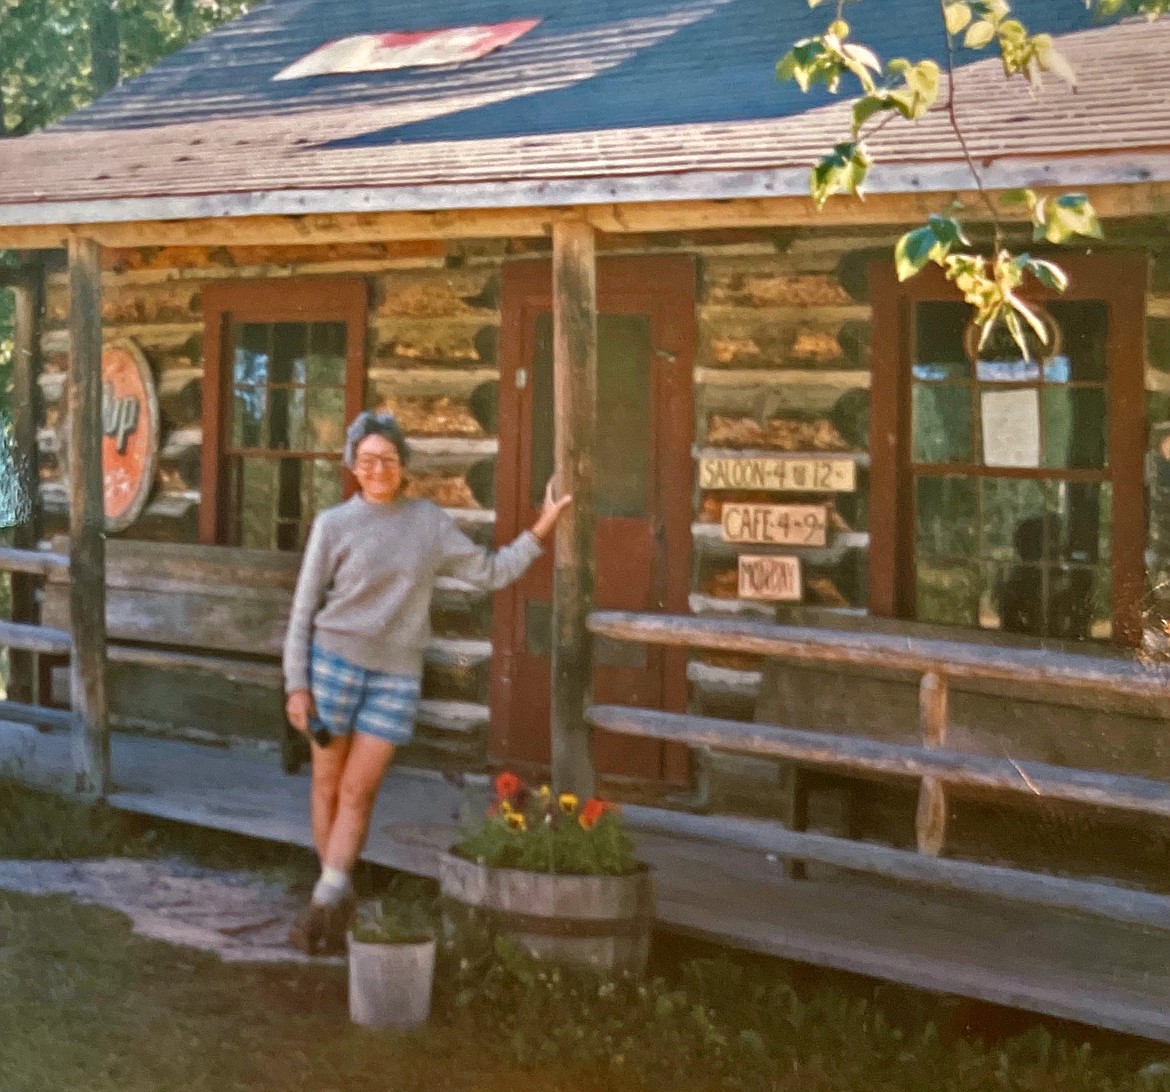 Boyce’s mother, 60, at Polebridge in the 80's prior to backpacking in Glacier. (Photo provided by Boyce)